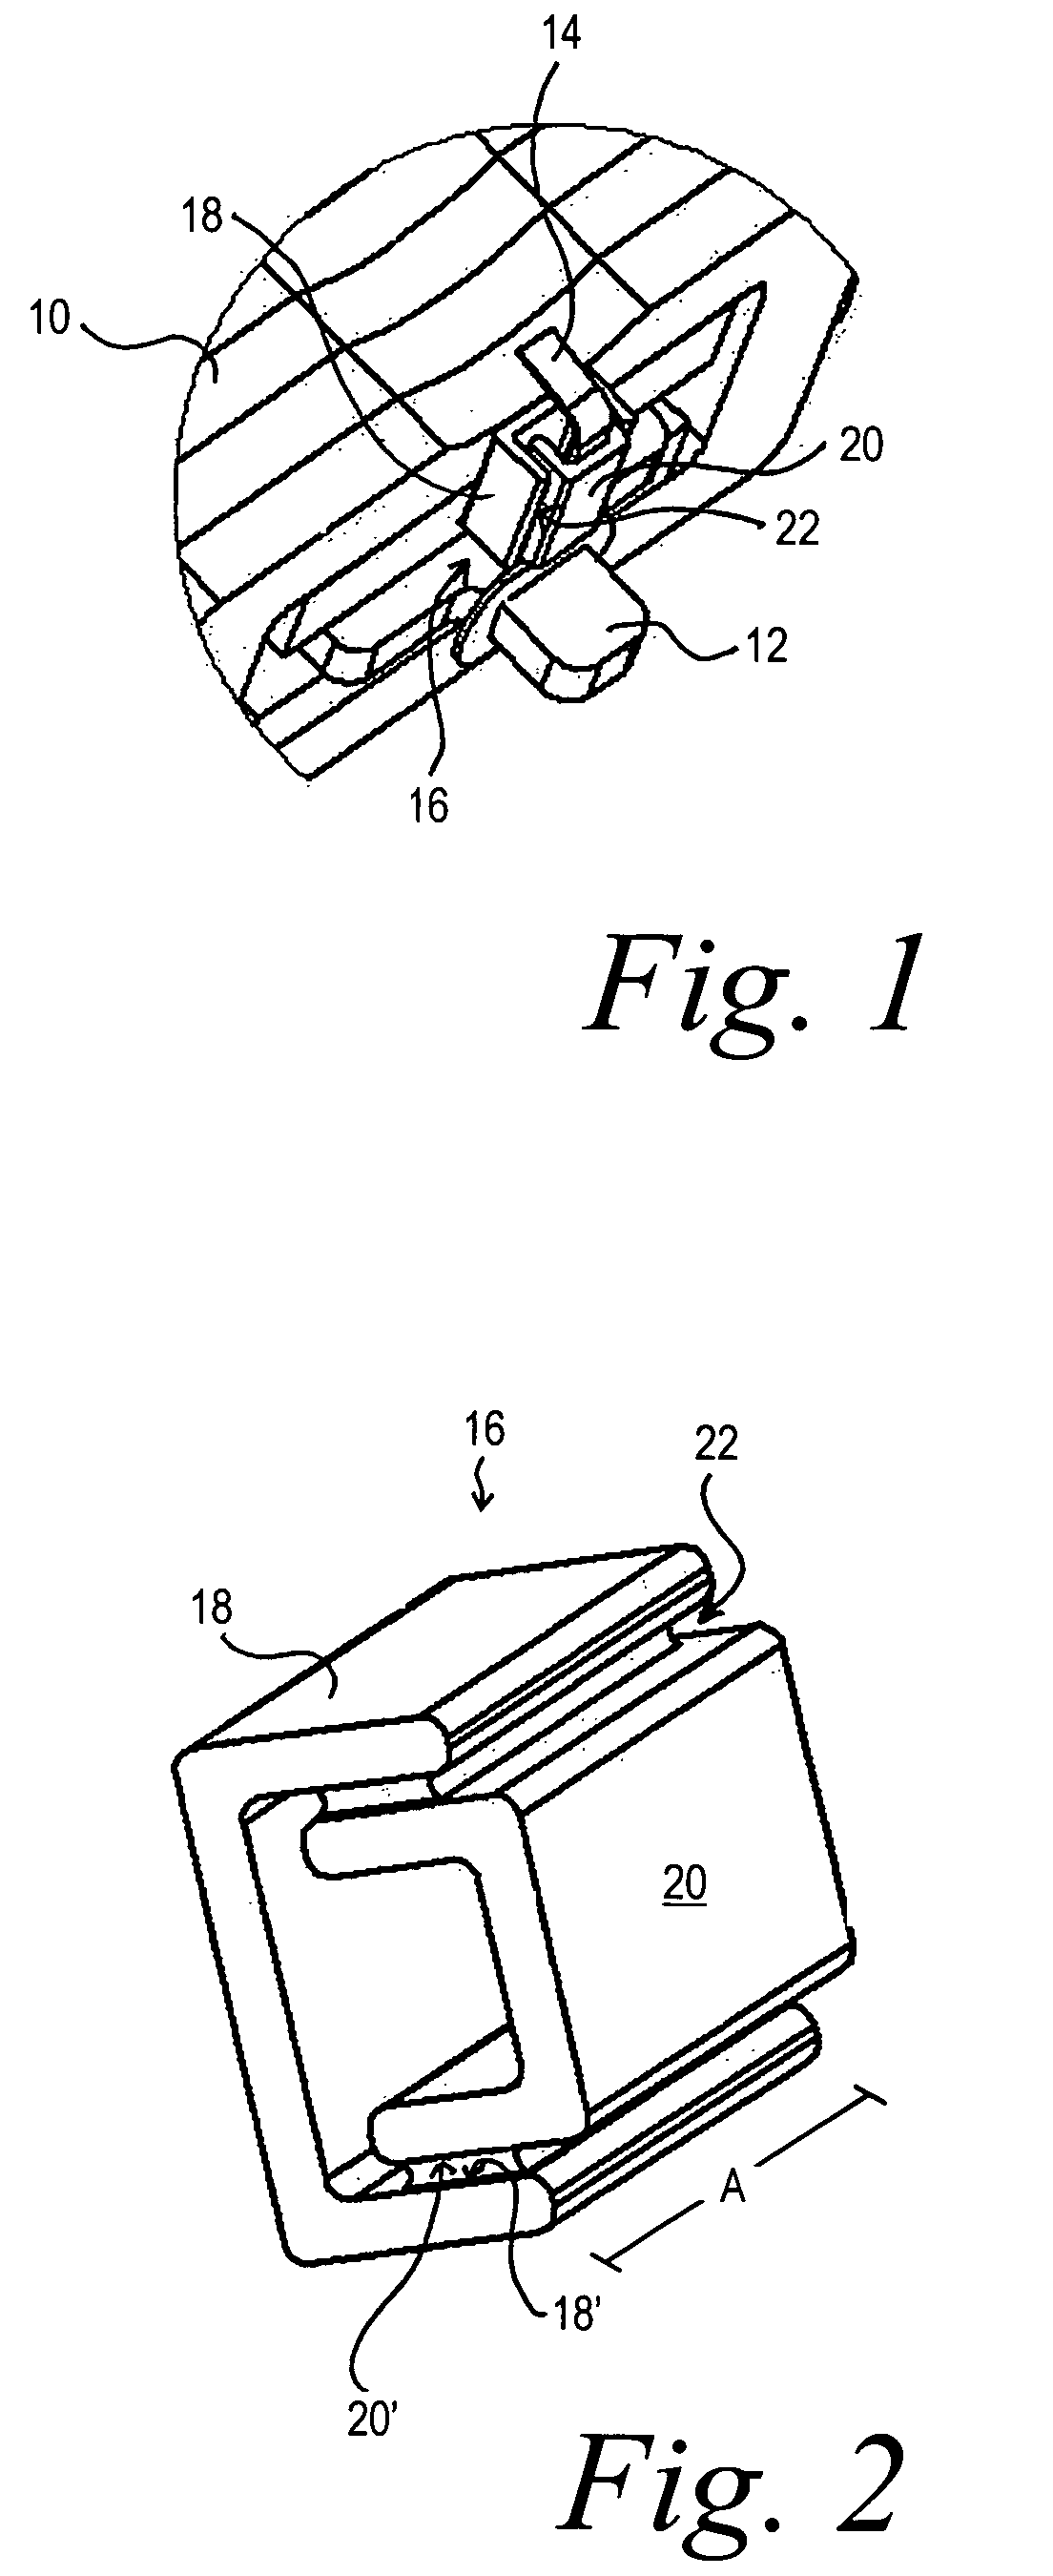 Transducers with improved viscous damping